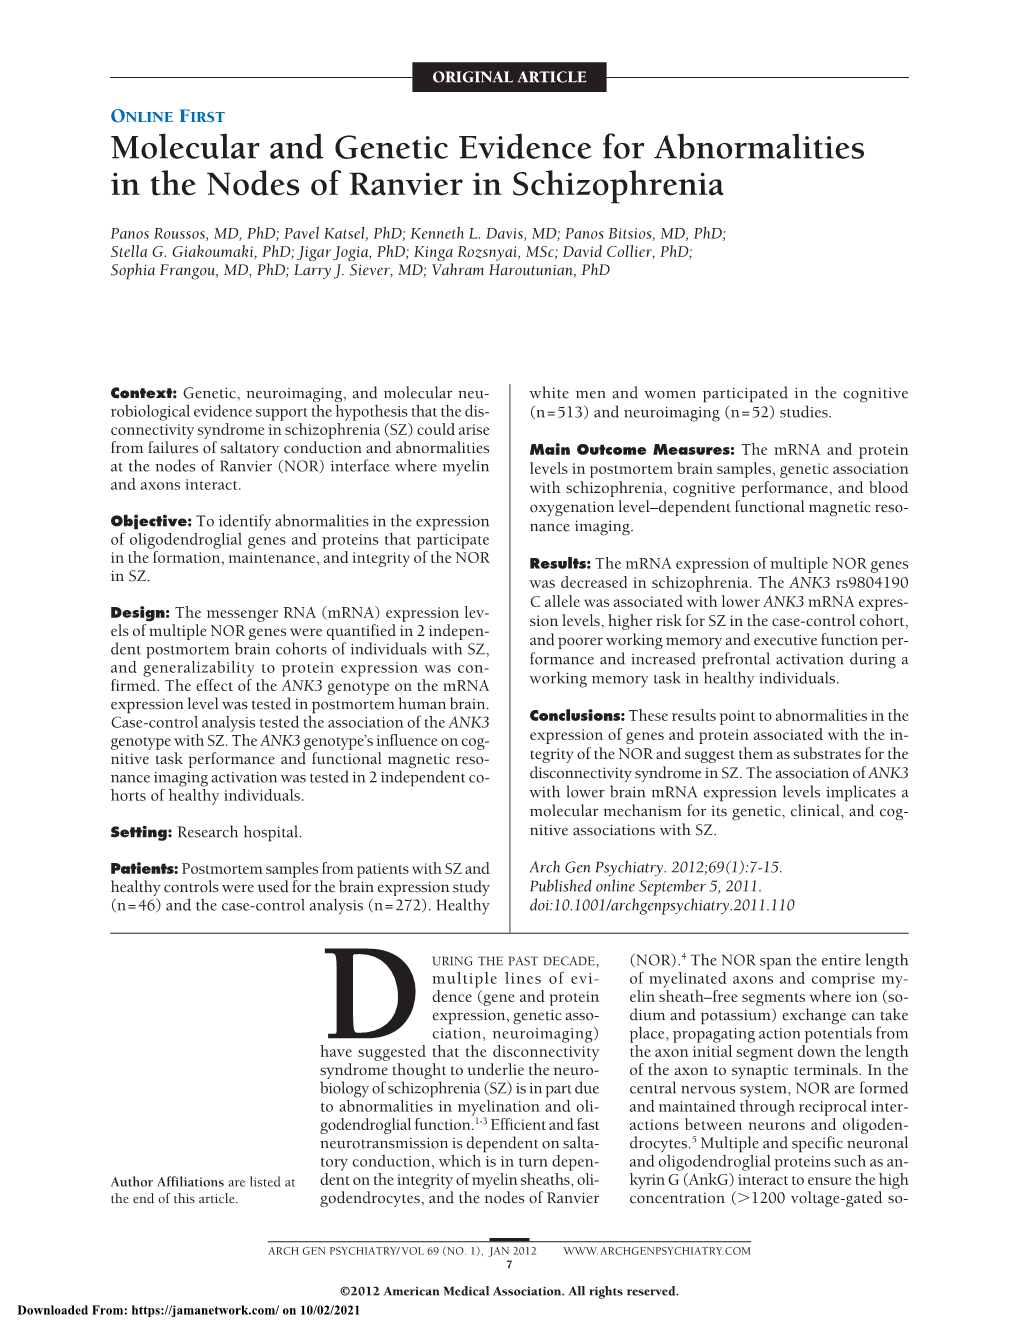 Molecular and Genetic Evidence for Abnormalities in the Nodes of Ranvier in Schizophrenia